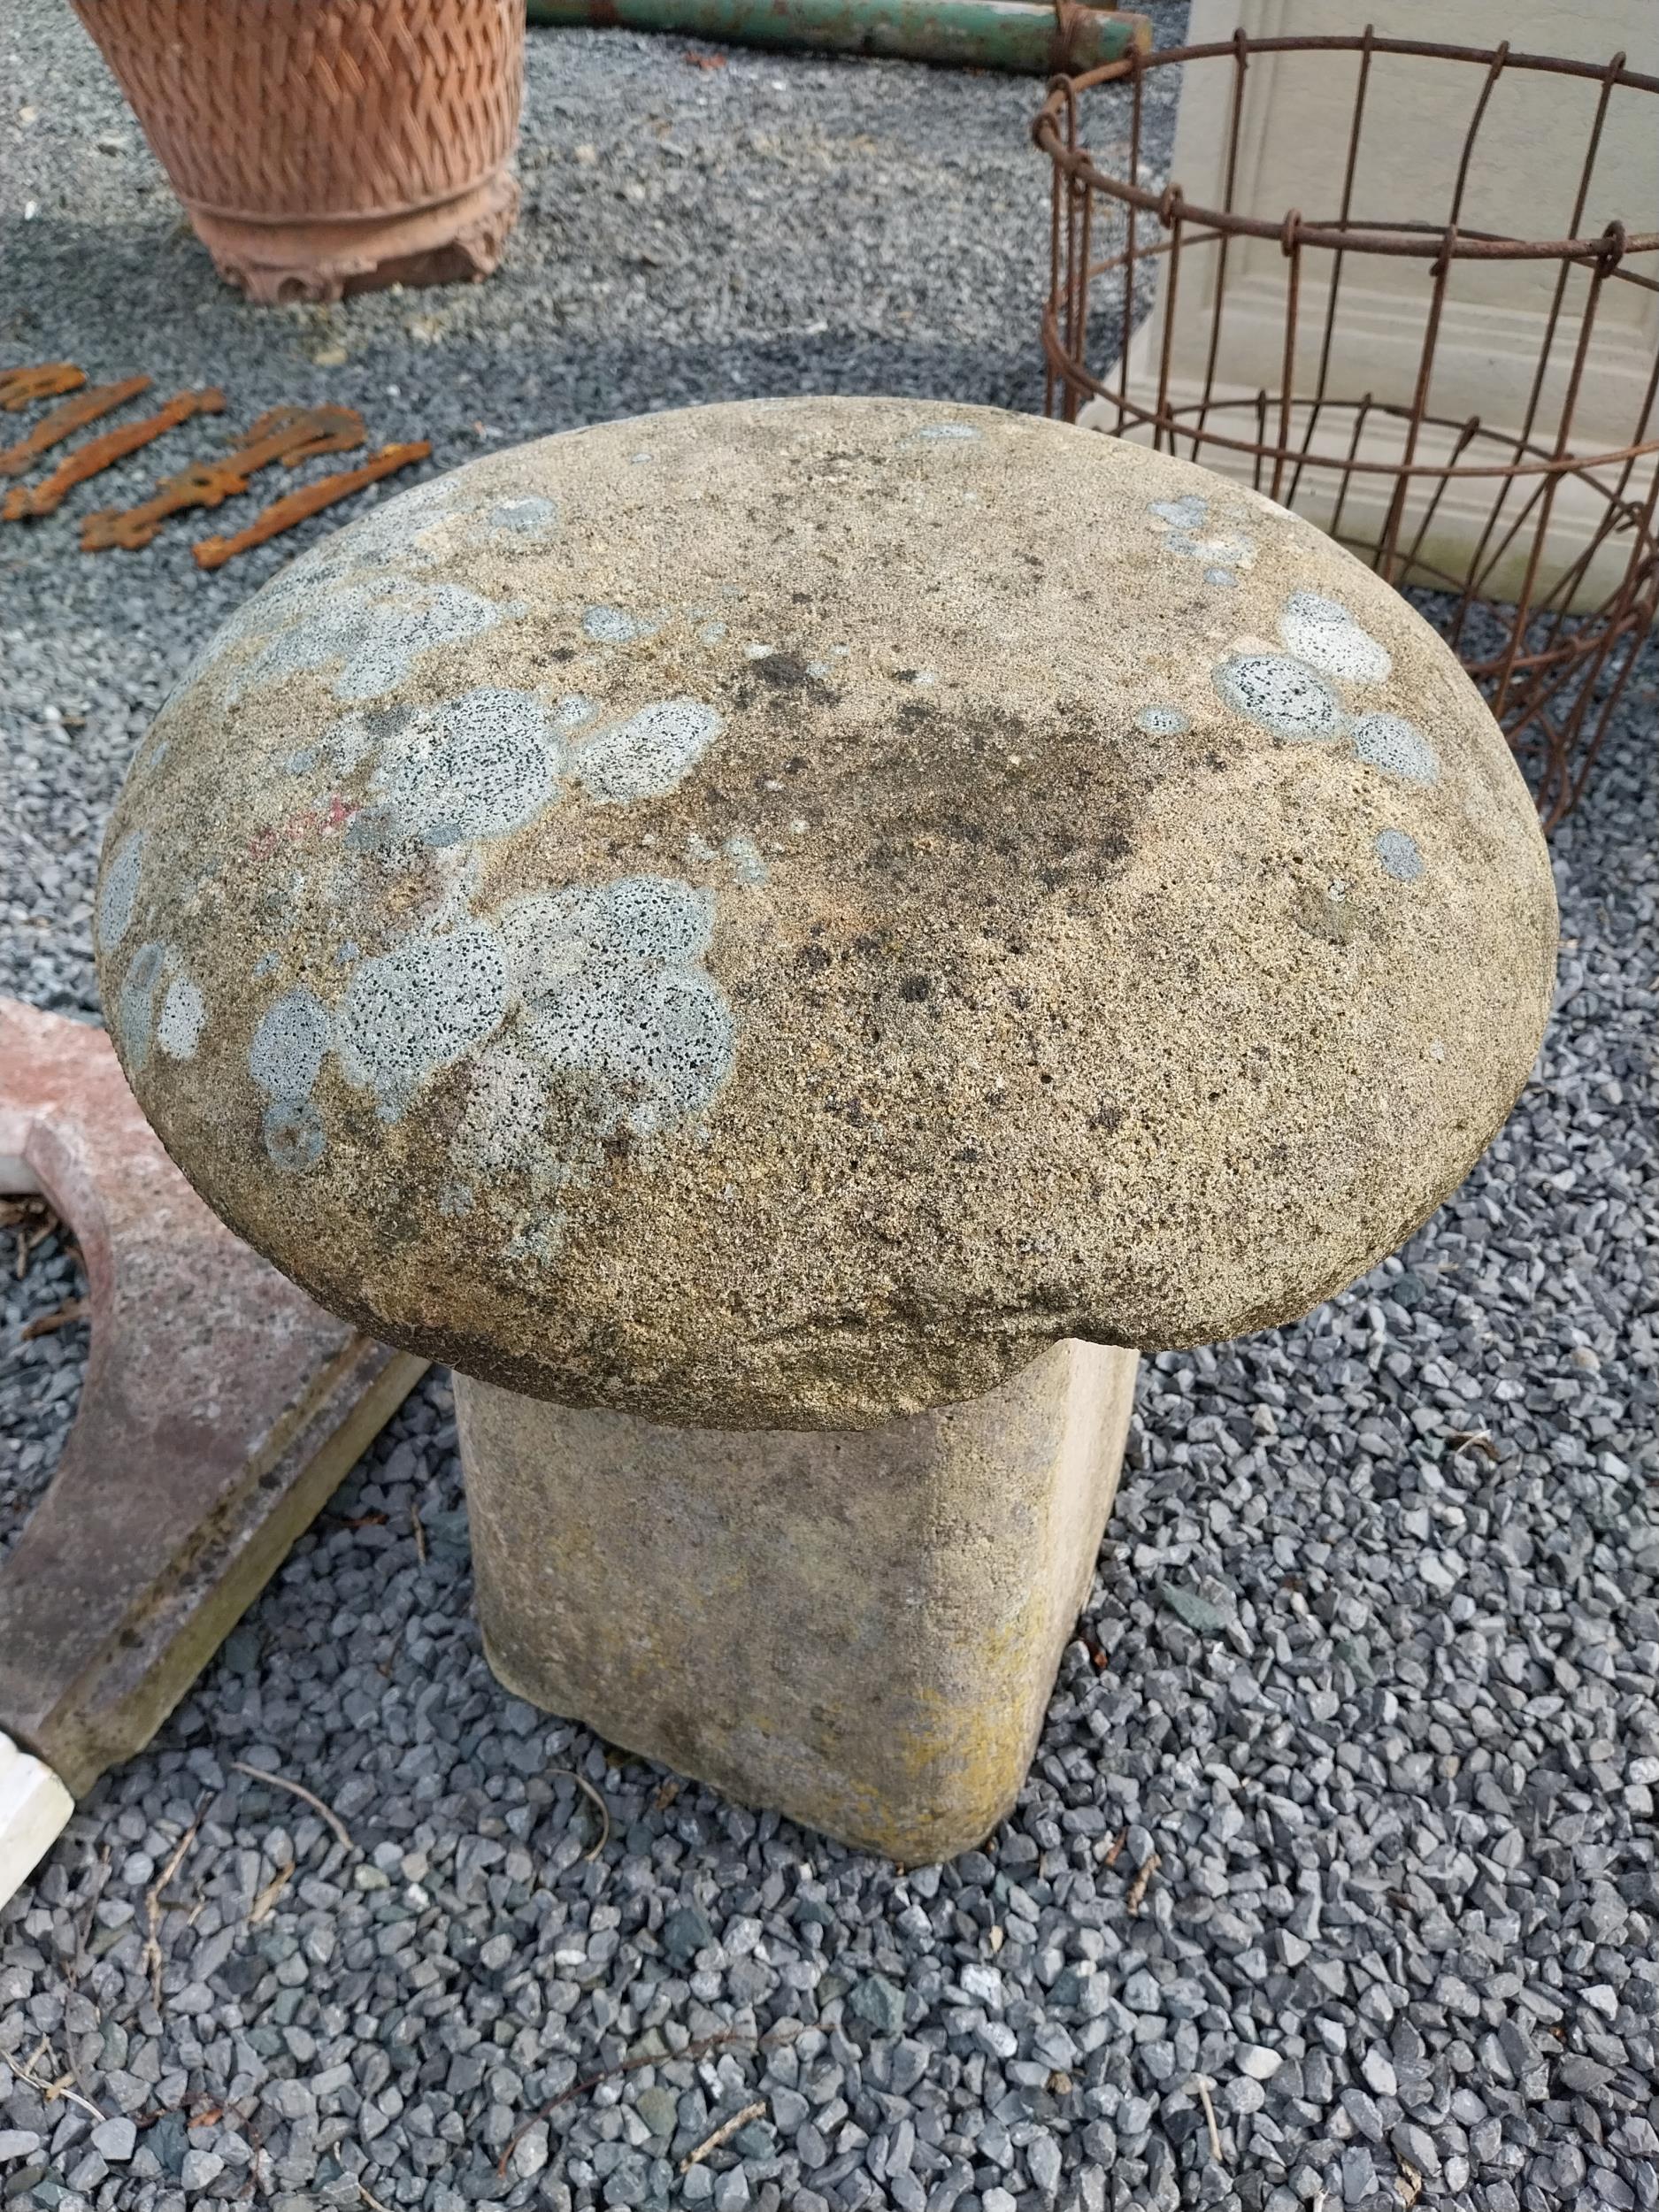 Sandstone staddle stone {60 cm H x 50 cm Dia}. (NOT AVAILABLE TO VIEW IN PERSON) - Image 2 of 3